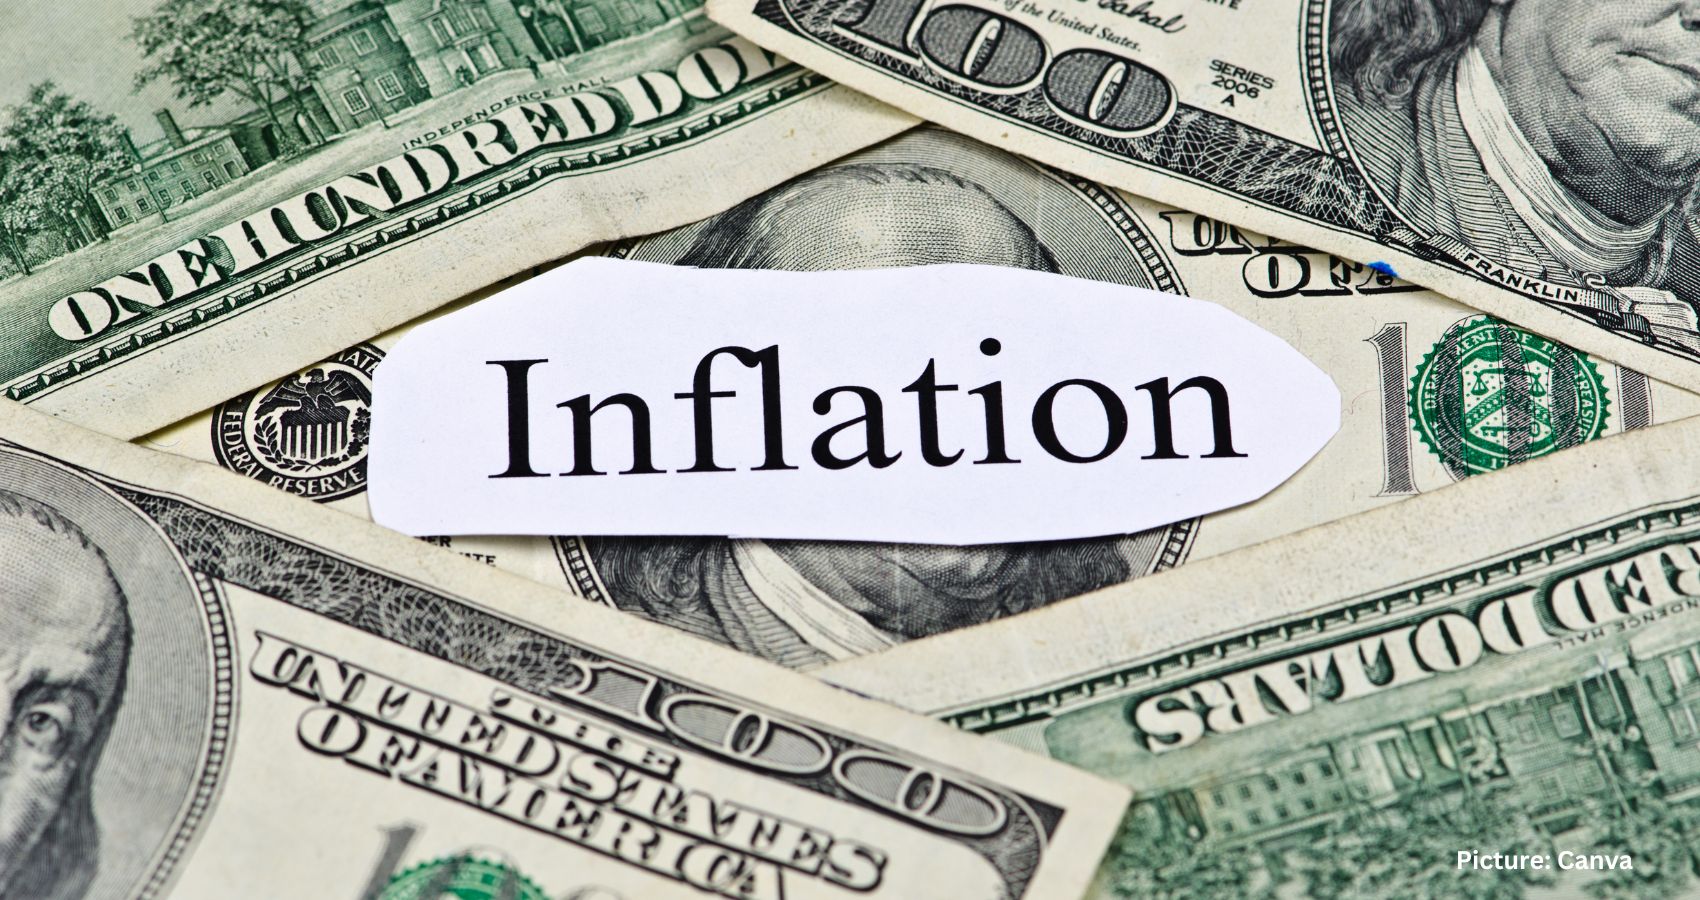 Featured & Cover Study Finds Inflation Expected to Outpace Salary Increases Across Most Industries by 2028